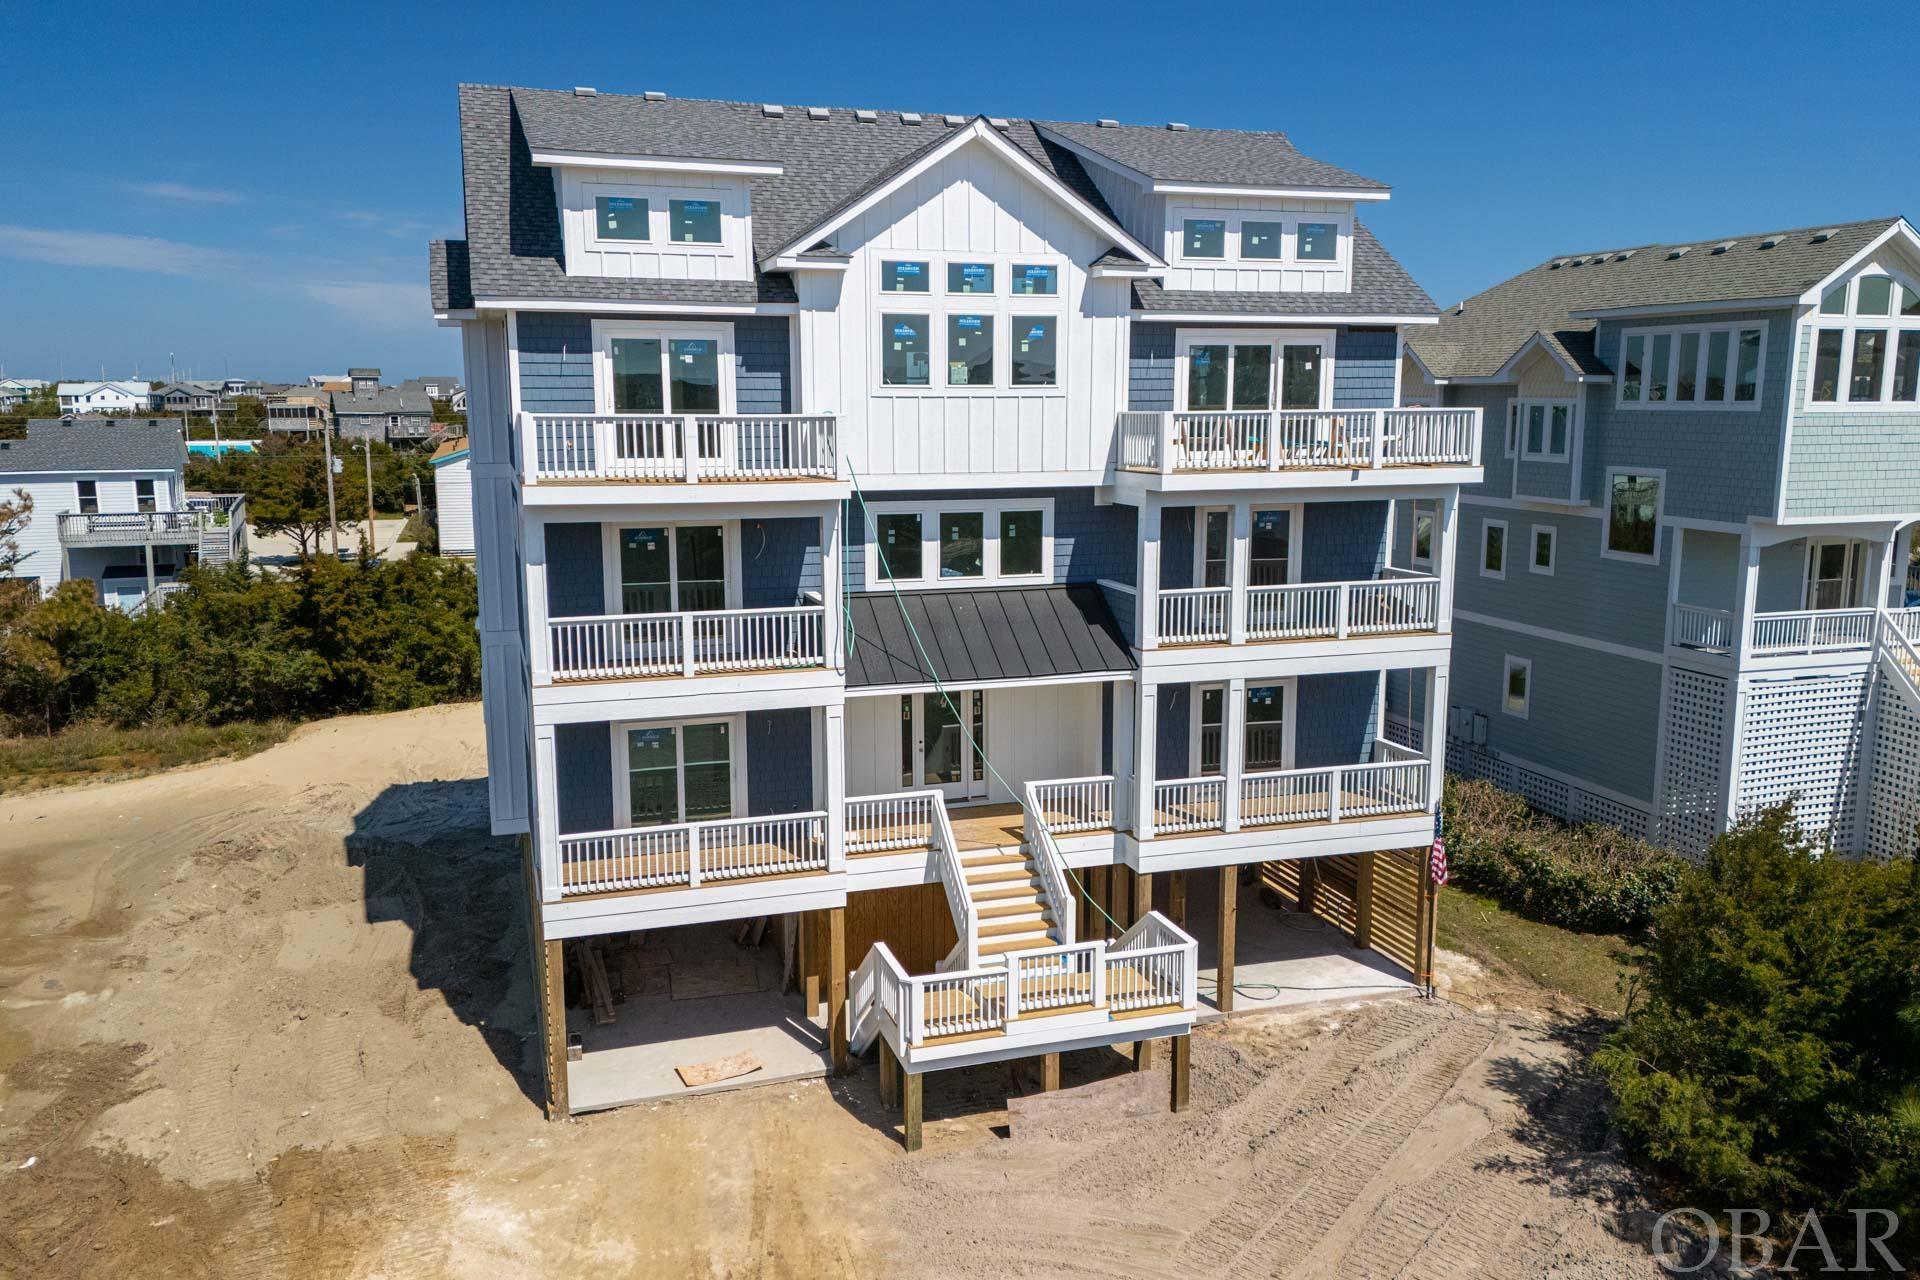 New construction for 2024!  Welcome to your coastal retreat in the upscale community of Hattie Creef Landing in Salvo, NC!  This stunning new construction home is located just 2 lots back from the oceanfront with views off the front decks.    It has easy access to the beach directly through the community.  This is the ultimate in luxury living.  With approximately 4,500 square feet, this eight-bedroom/eight-full and two-half-bath home is perfect for hosting family and friends and is sure to be an incredible rental property!  The top level of the home has an abundance of natural light and boasts a spacious open living area complete with vaulted ceilings, a dining area and a large kitchen featuring two quartz islands for family and friends to enjoy this gourmet kitchen.  Step outside to enjoy the ocean breeze on the multiple outdoor deck spaces and gathering areas. This home is designed for entertainment and relaxation, with a private pool, hot tub, elevator, recreation room, and theater room.  Each bedroom boasts its own ensuite, ensuring privacy and convenience for all guests.  Built in 2024 by Sandalwood Construction, a premier builder with over 40 years of experience designing and building fine homes on the Outer Banks, this home is built to the highest standards of quality and durability. The combination of roof shingles, exterior siding, composite trim, windows, doors, and construction techniques ensures low maintenance and a sustainable home for years to come. Don't miss your opportunity to own this coastal oasis!  Schedule your showing today and start enjoying everything that Hatteras Island has to offer, including pristine uncrowded beaches, world-class kiteboarding and surfing, fishing, and amazing local restaurants. The home is sold fully furnished and completely rental ready with beautiful furniture and decor. Smart tv's throughout the home and in every bedroom. This an amazing new construction opportunity!!